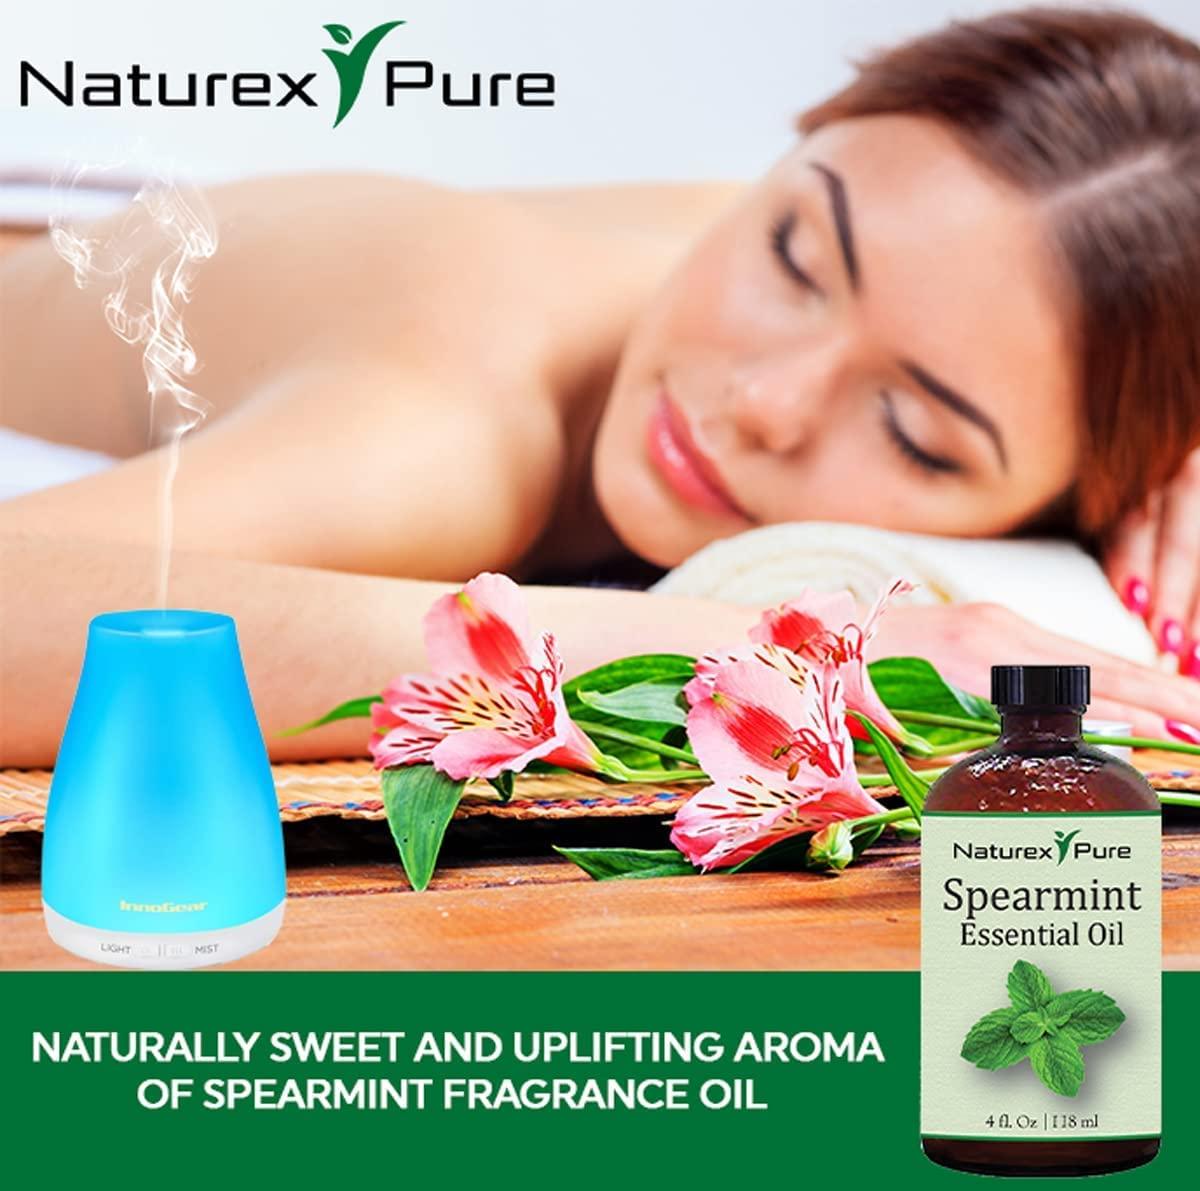 Spearmint Essential Oil - Pure Natural Undiluted Choose Size